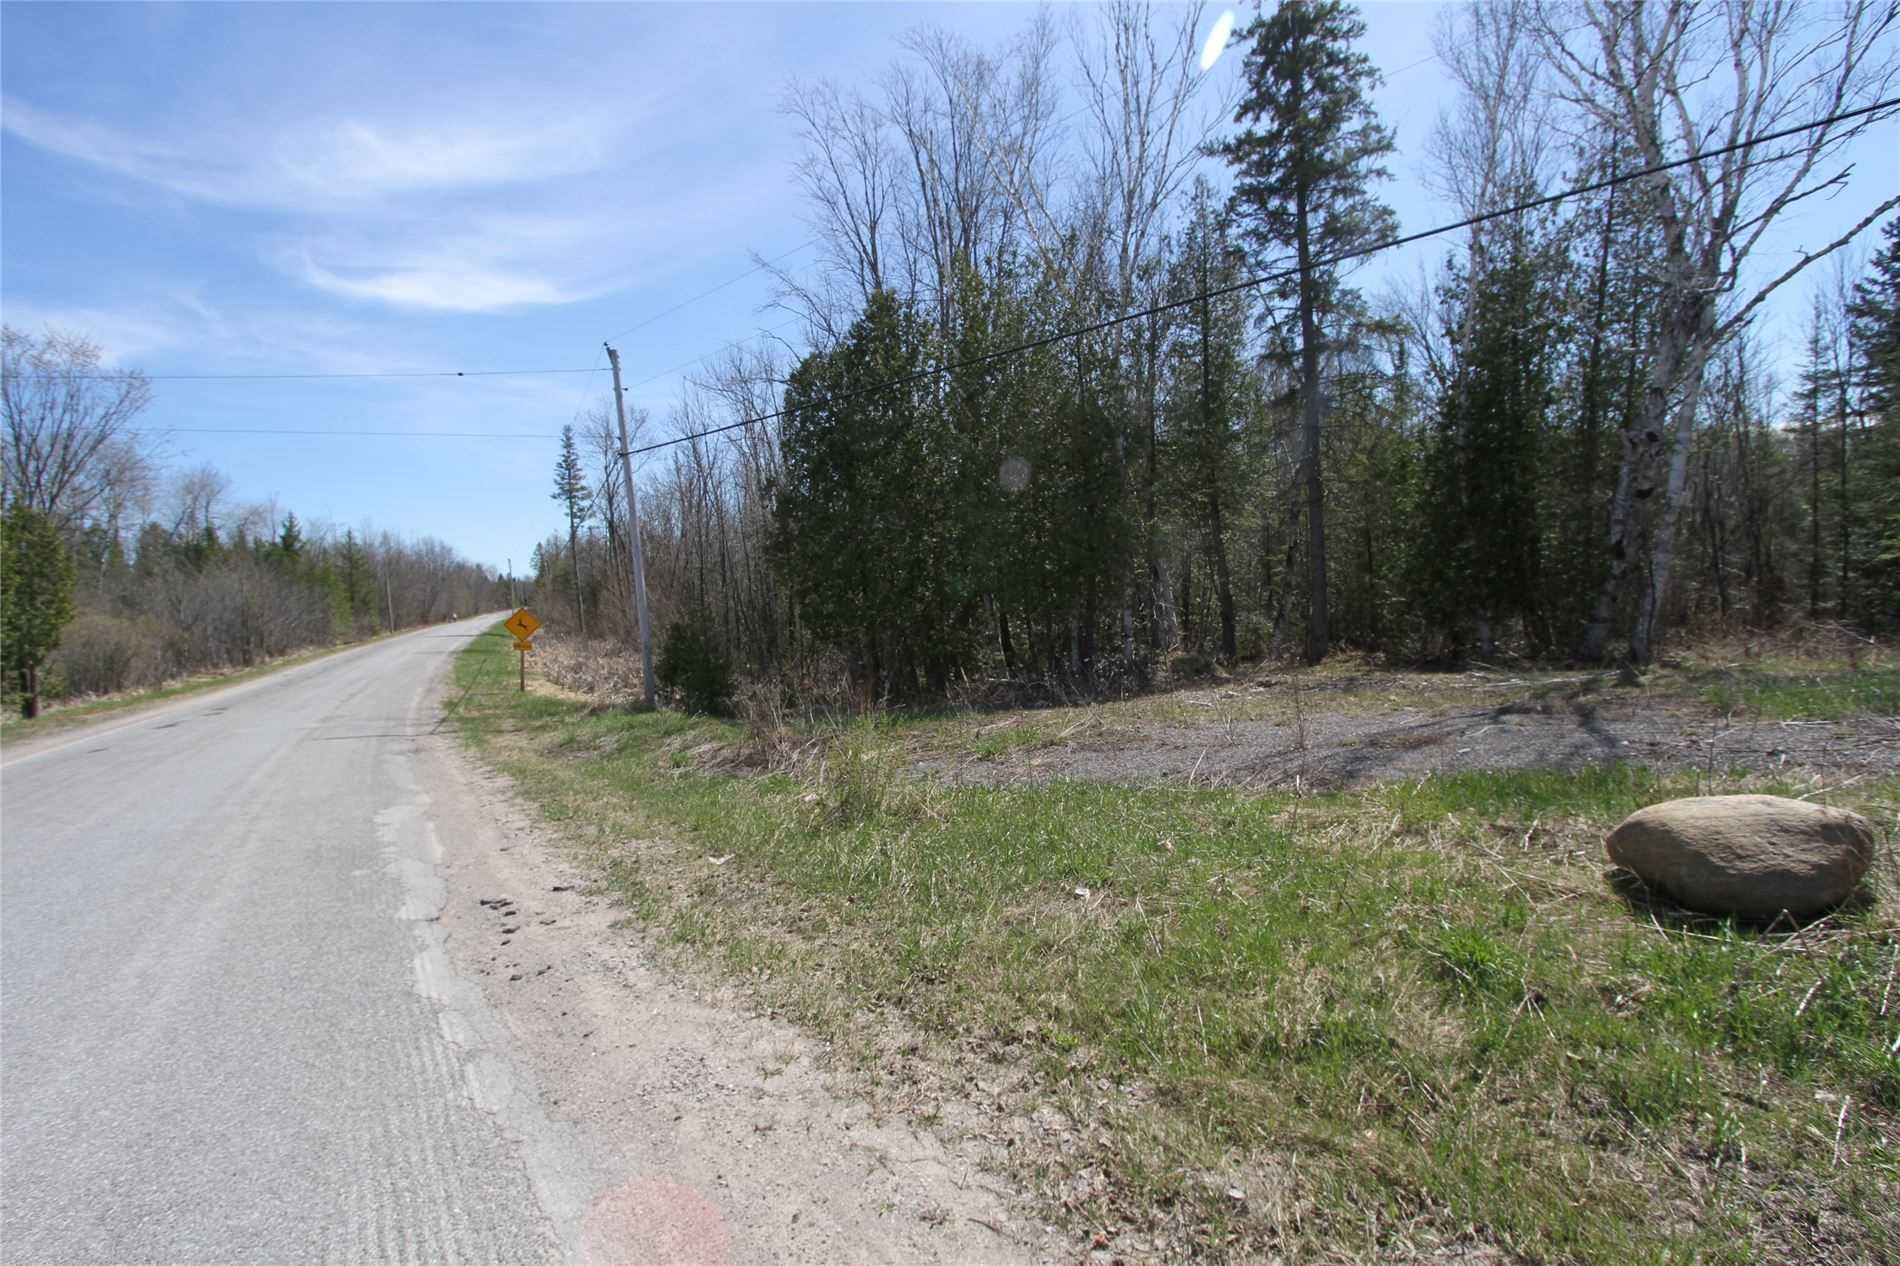 Main Photo: 259 County Rd 41 Road in Kawartha Lakes: Rural Bexley Property for sale : MLS®# X5210398